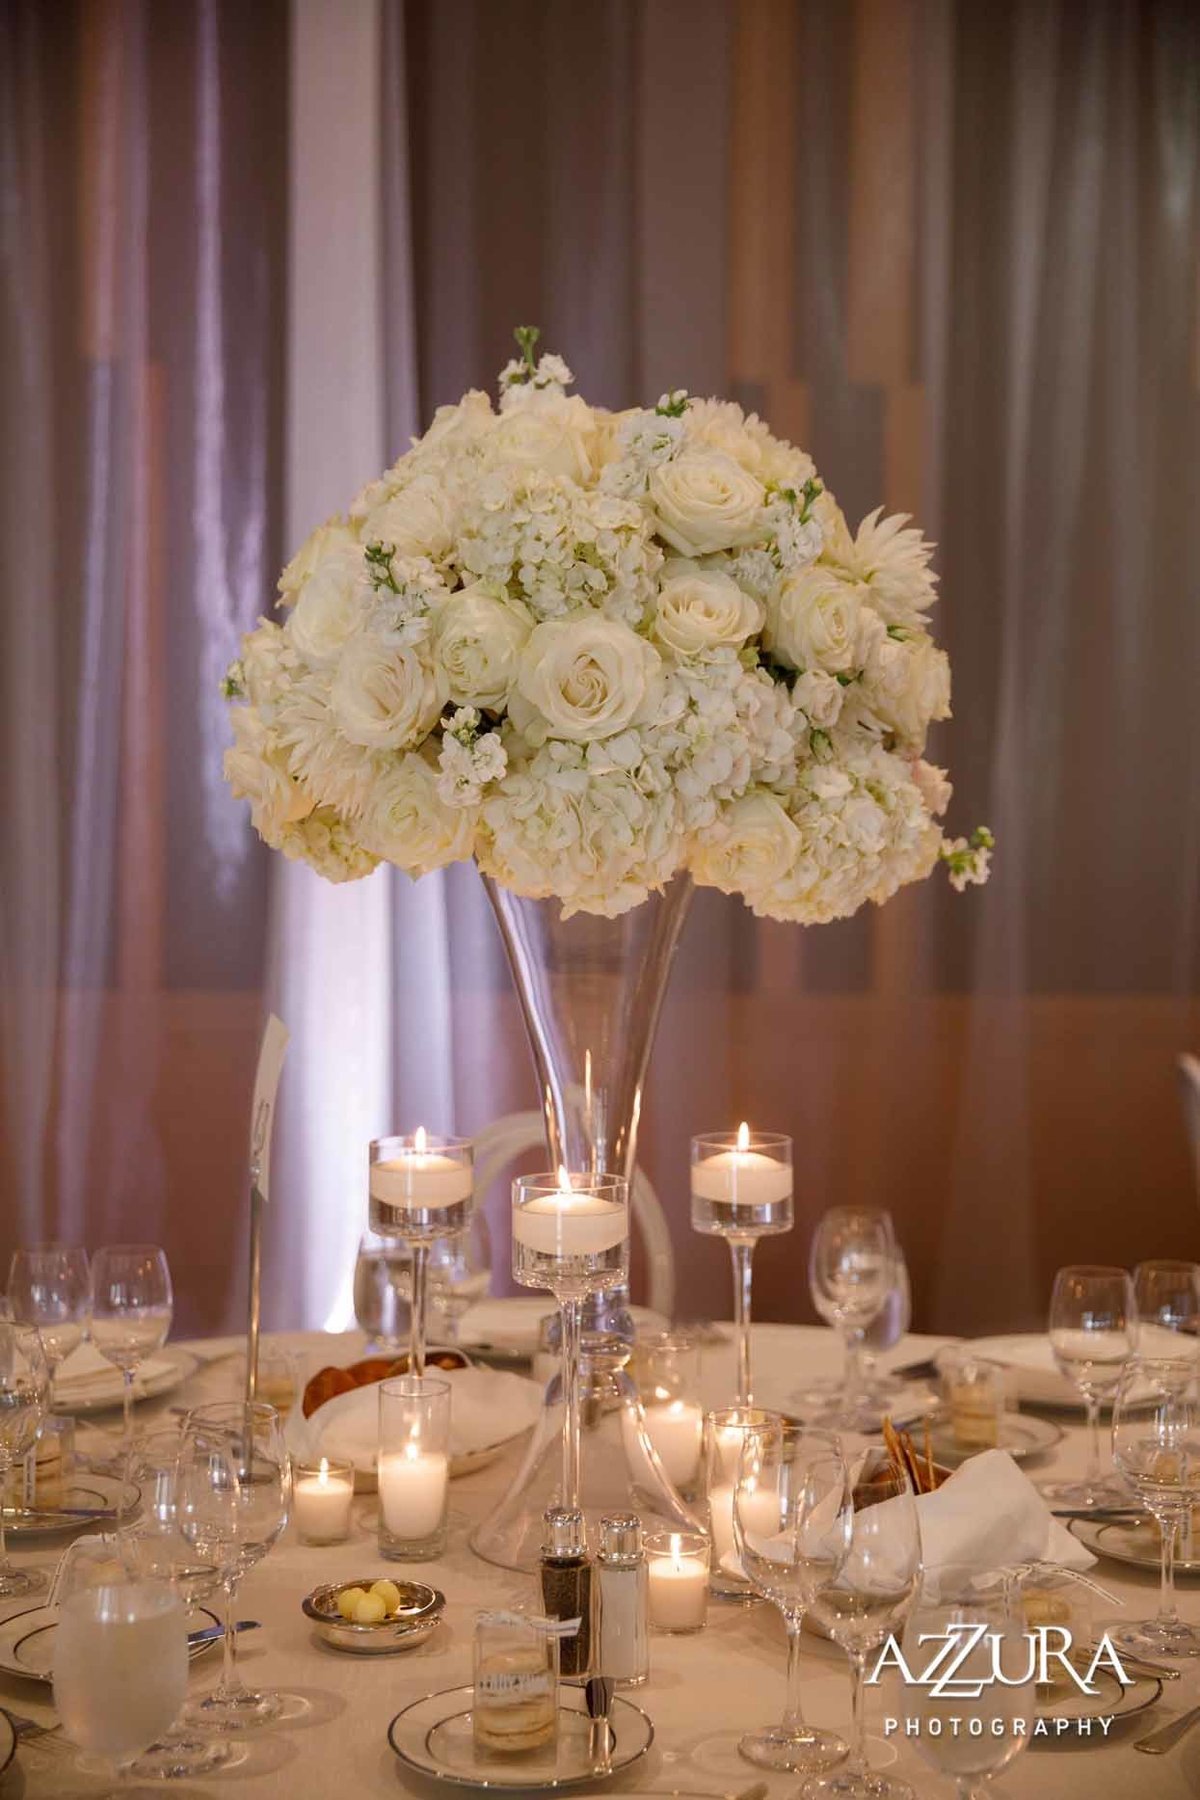 large white centerpiece of all white roses, white hydrangea, white stock on tall crystal vase with glass candle holders on white linen